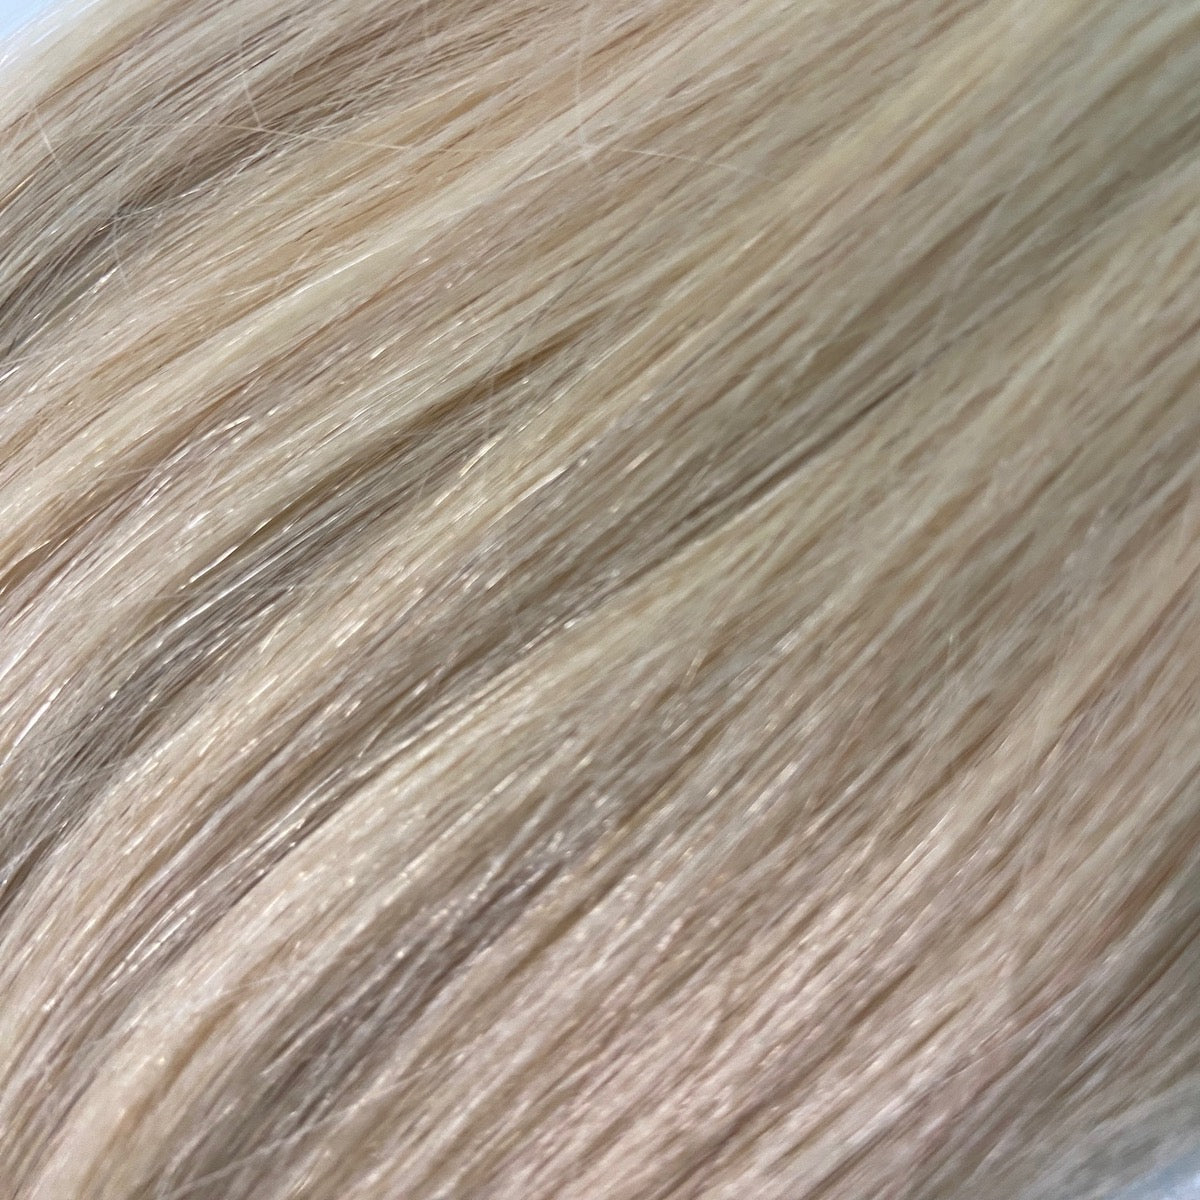 I-Tip 16" 25g Professional Hair Extensions - #22 Light Ash Blonde